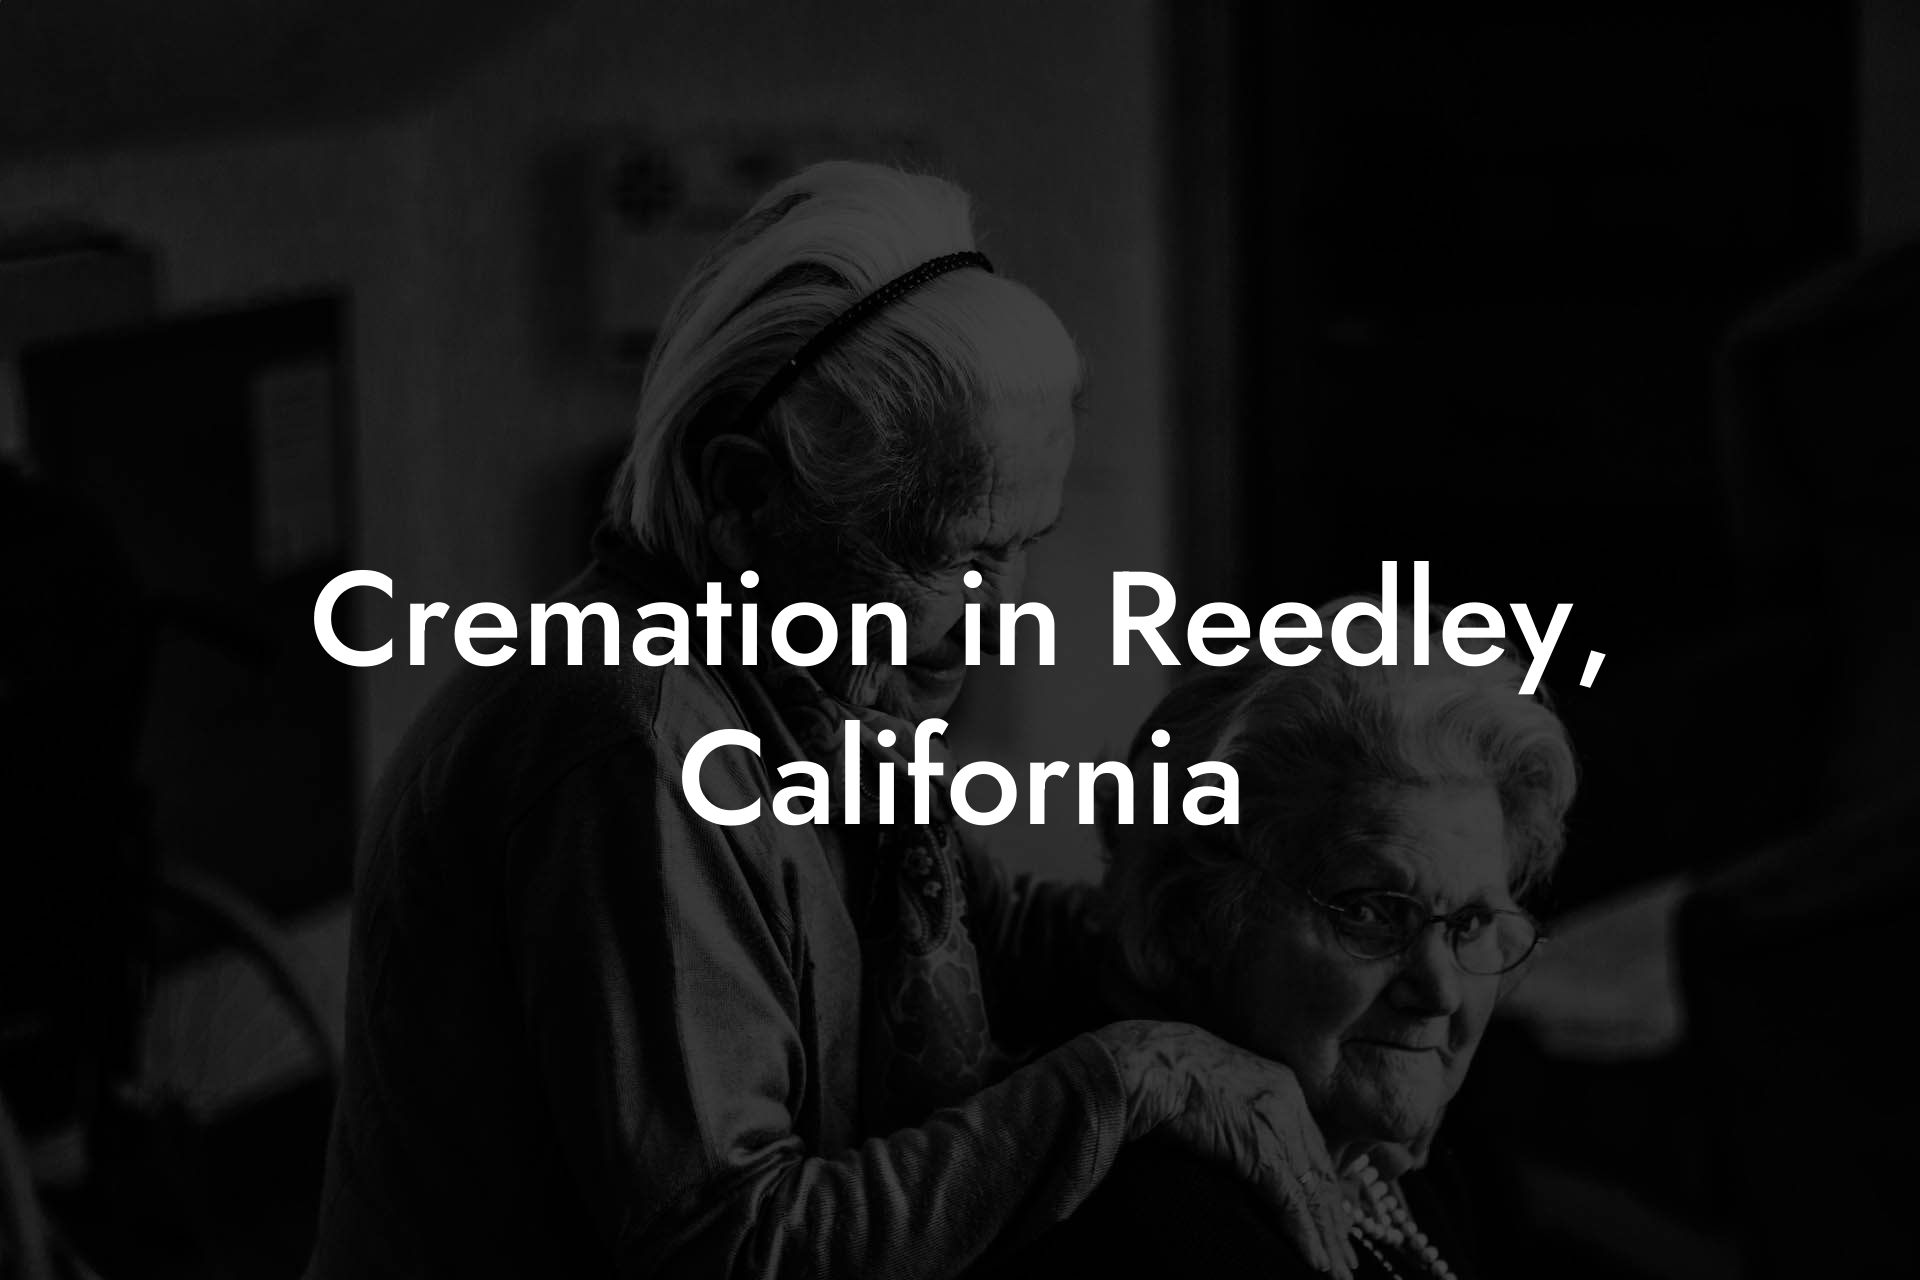 Cremation in Reedley, California